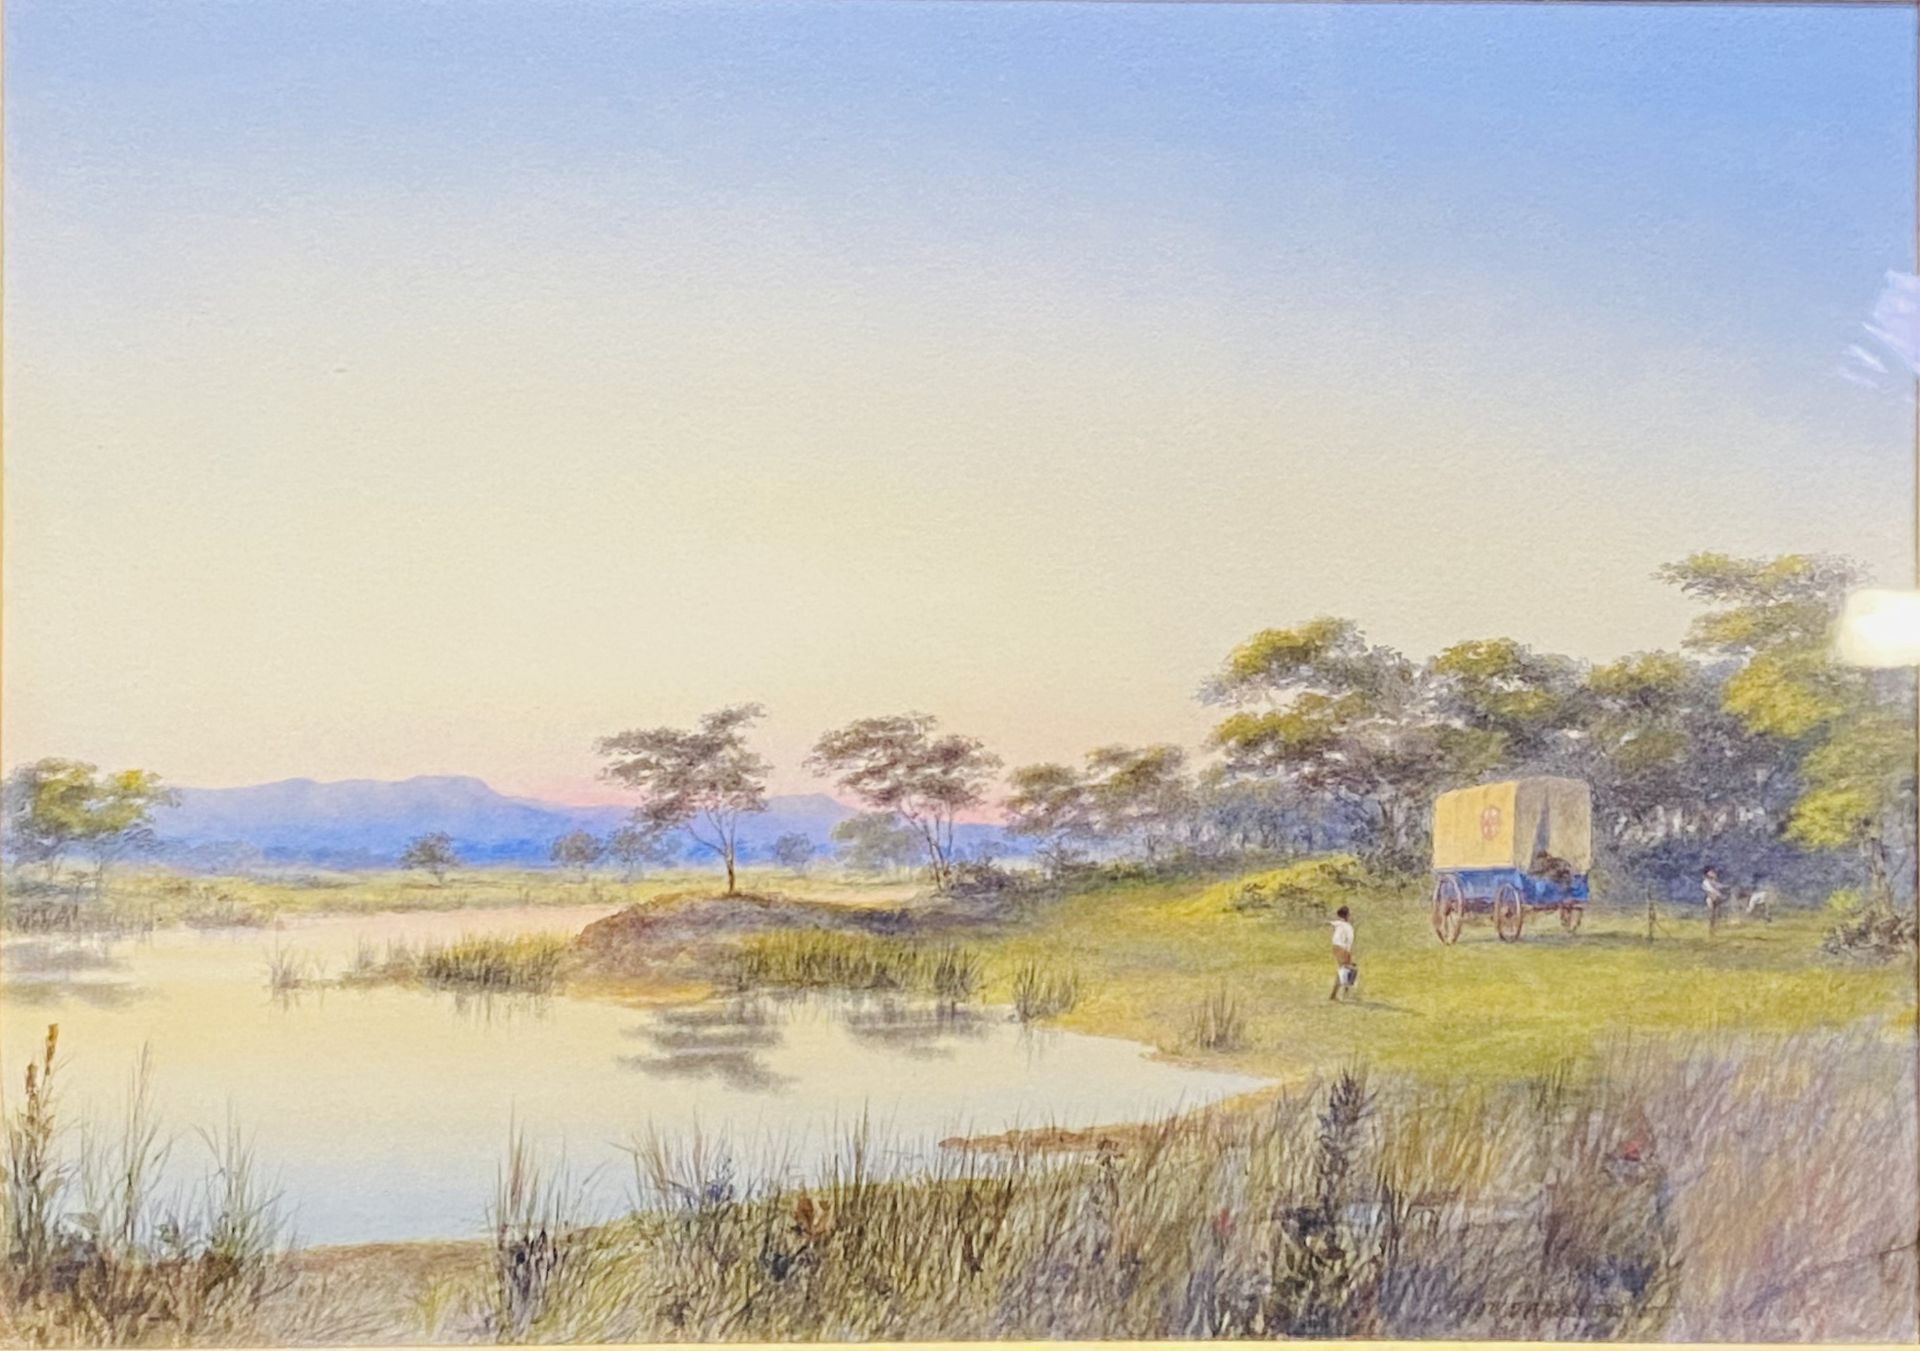 Framed and glazed watercolour witten to mount 'South Africa John Lamb'